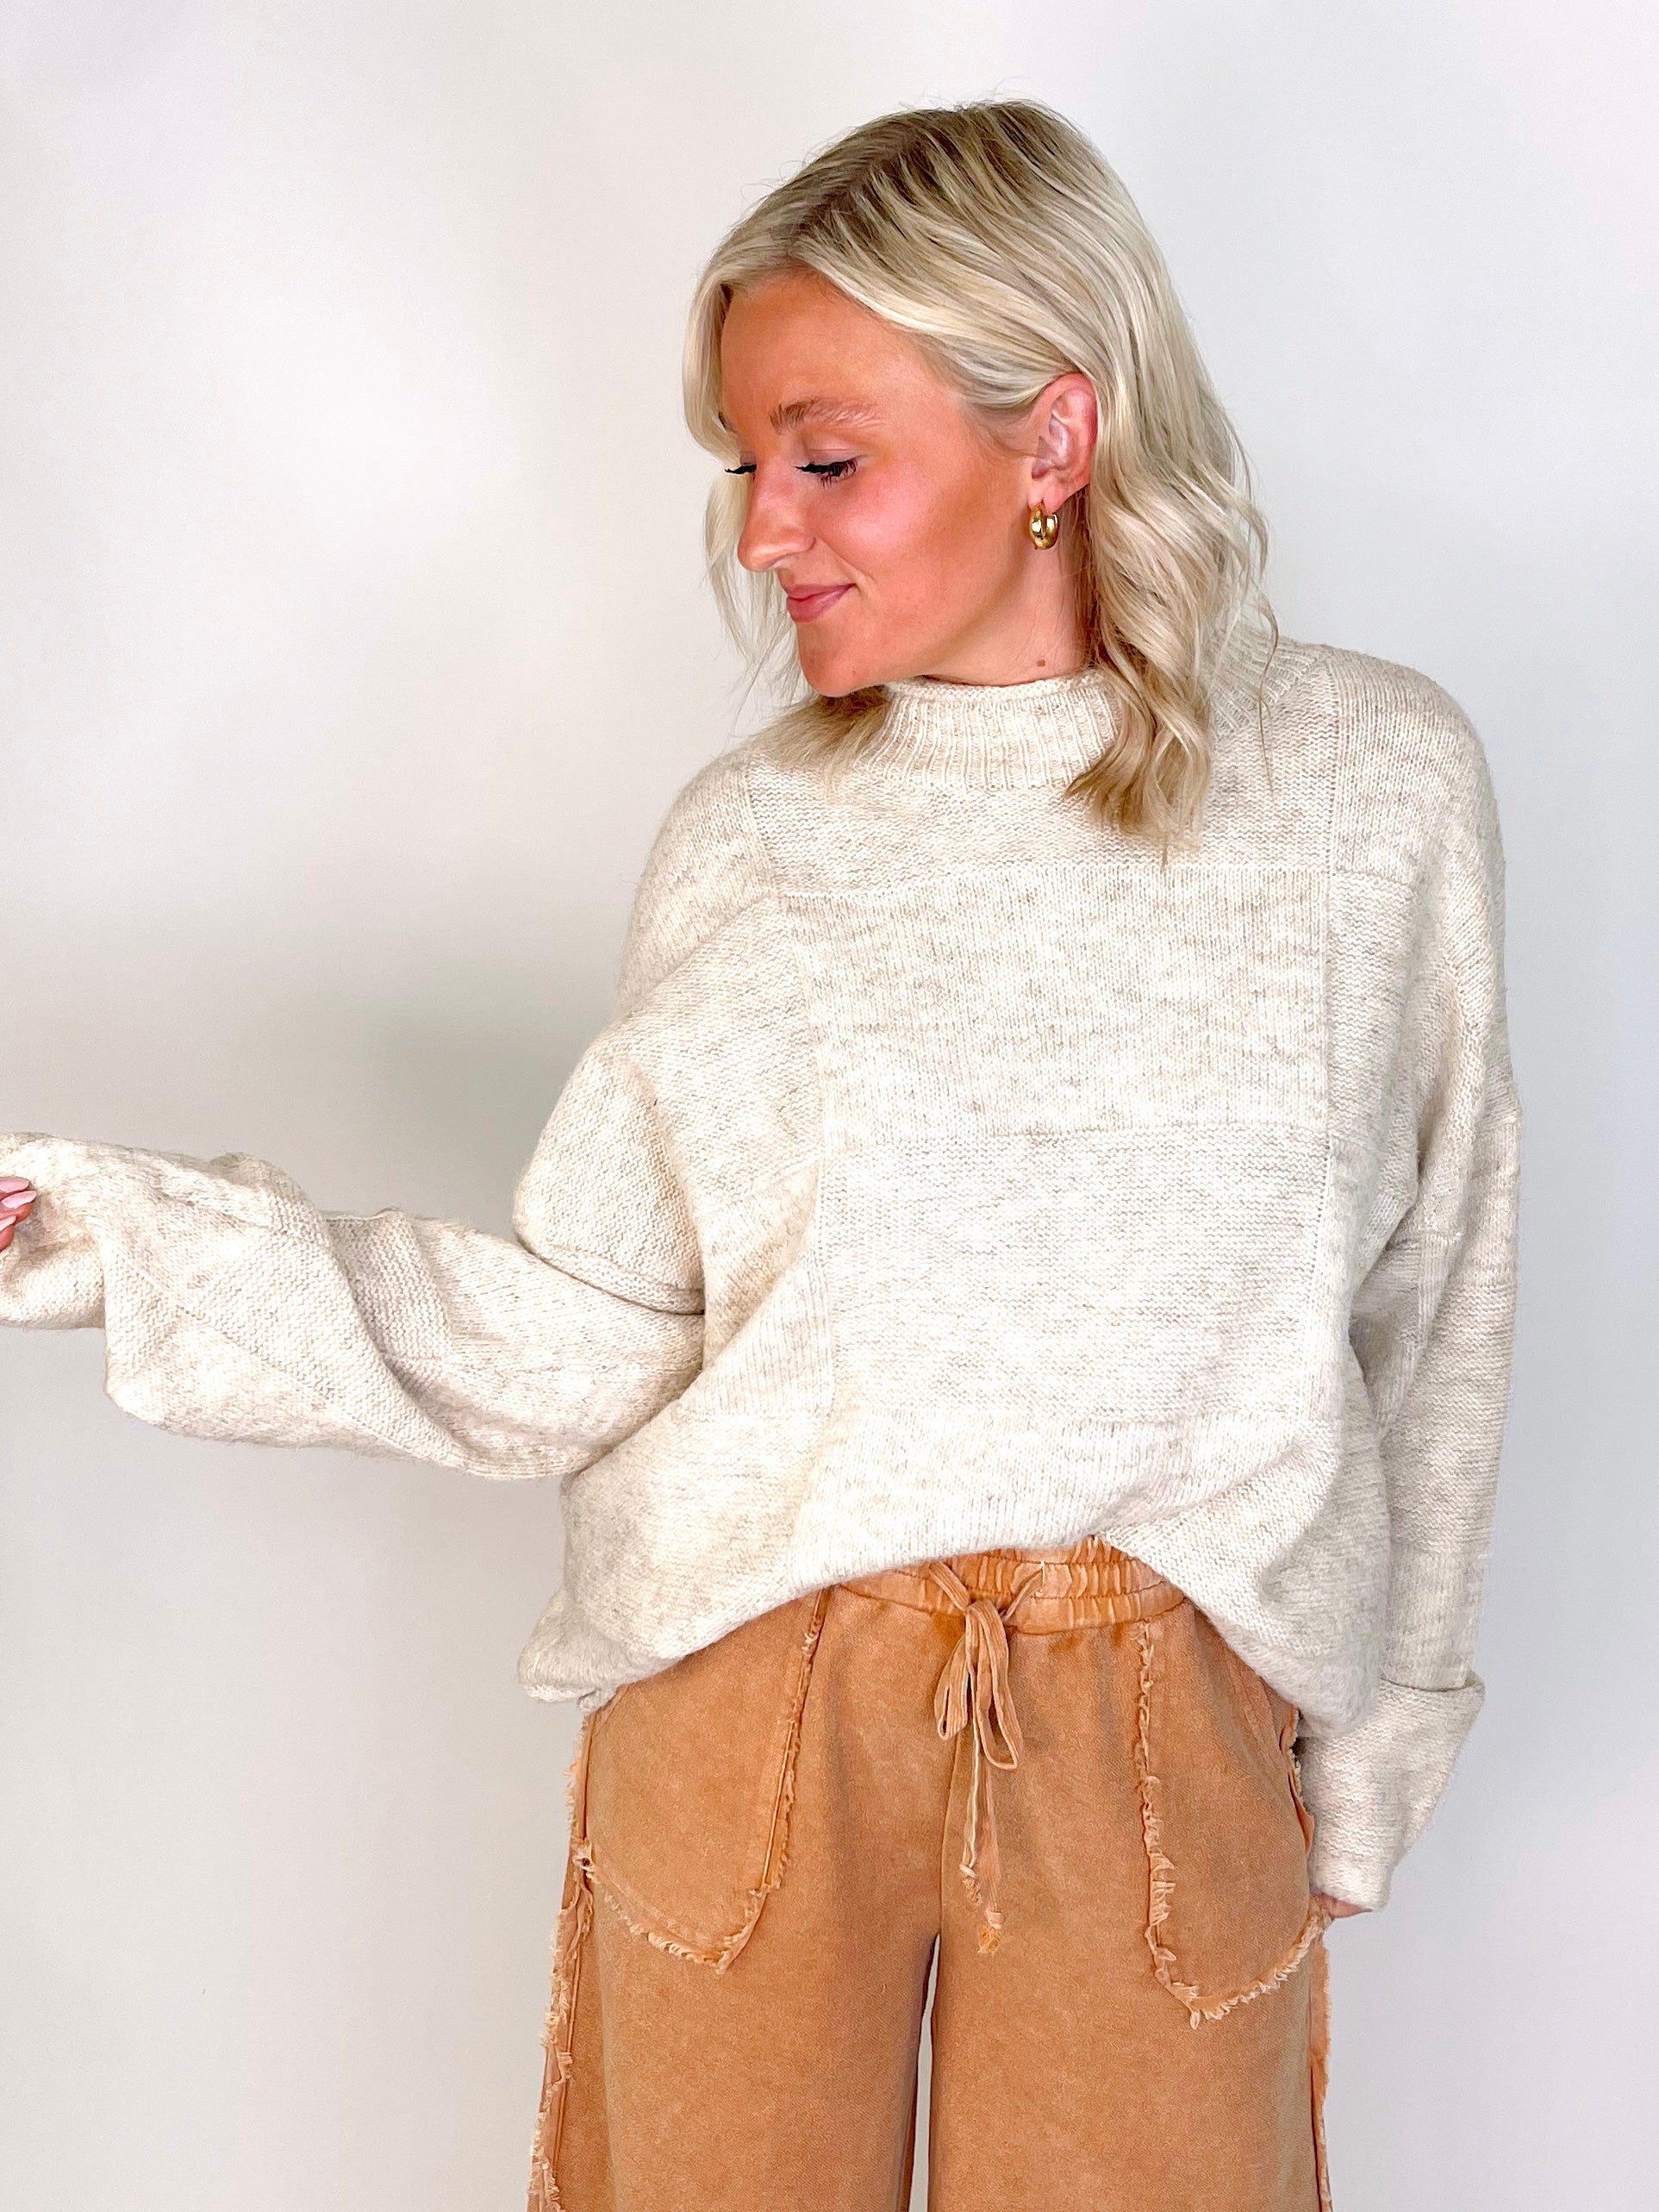 The Kaya Sweater-Sweaters-Aemi + Co-The Village Shoppe, Women’s Fashion Boutique, Shop Online and In Store - Located in Muscle Shoals, AL.